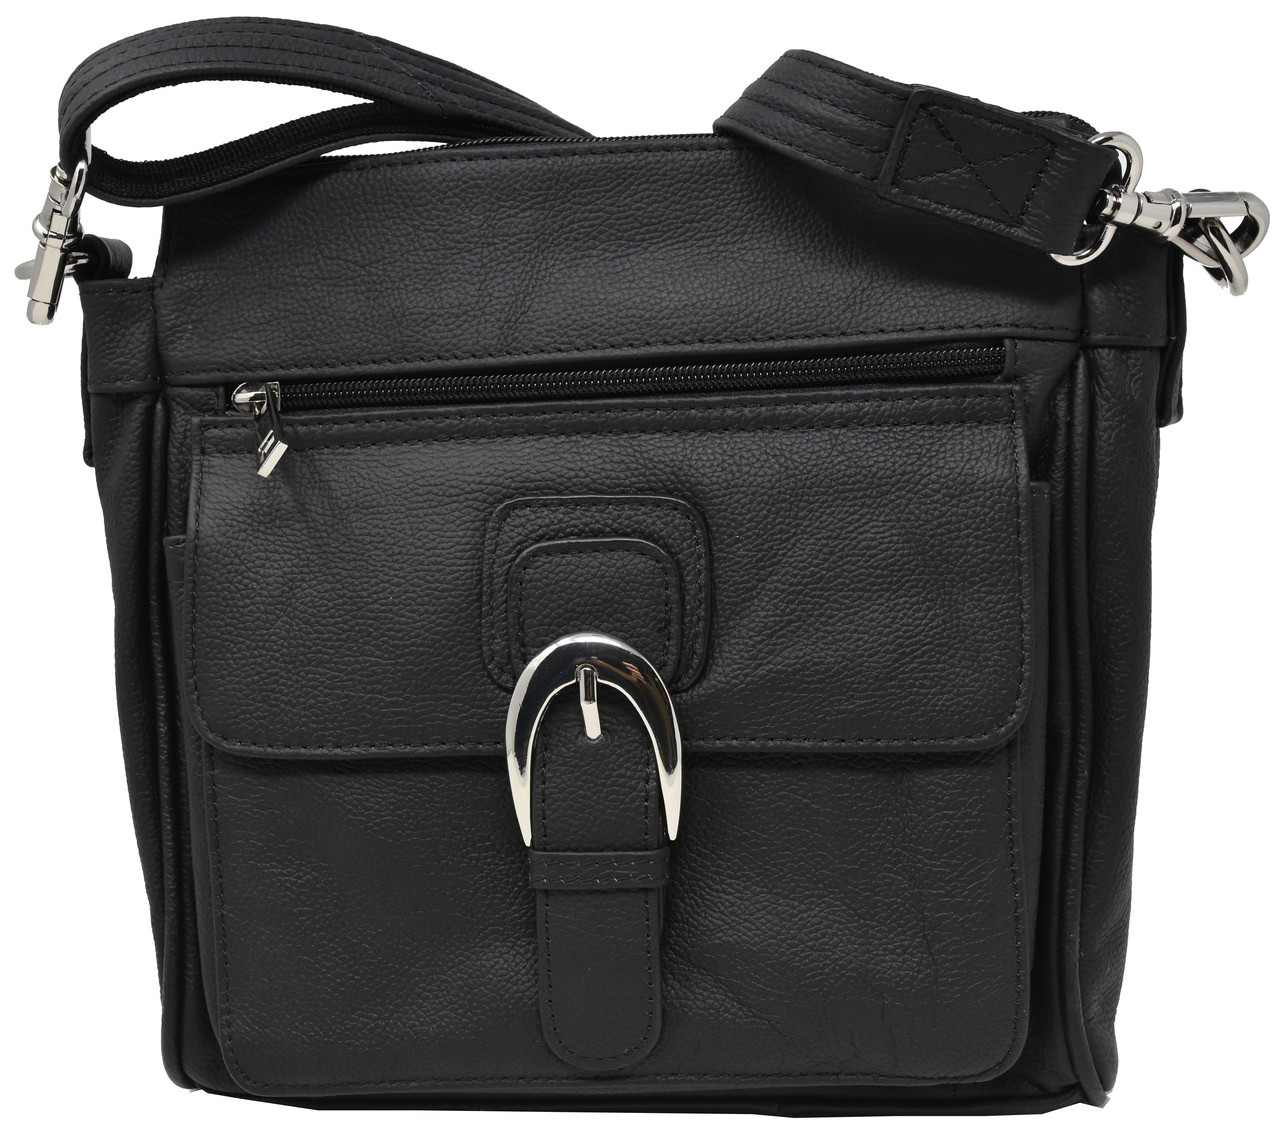 Black Crossbody or Shoulder Carry Leather Locking Concealment Purse  - CCW Concealed Carry Gun Bag